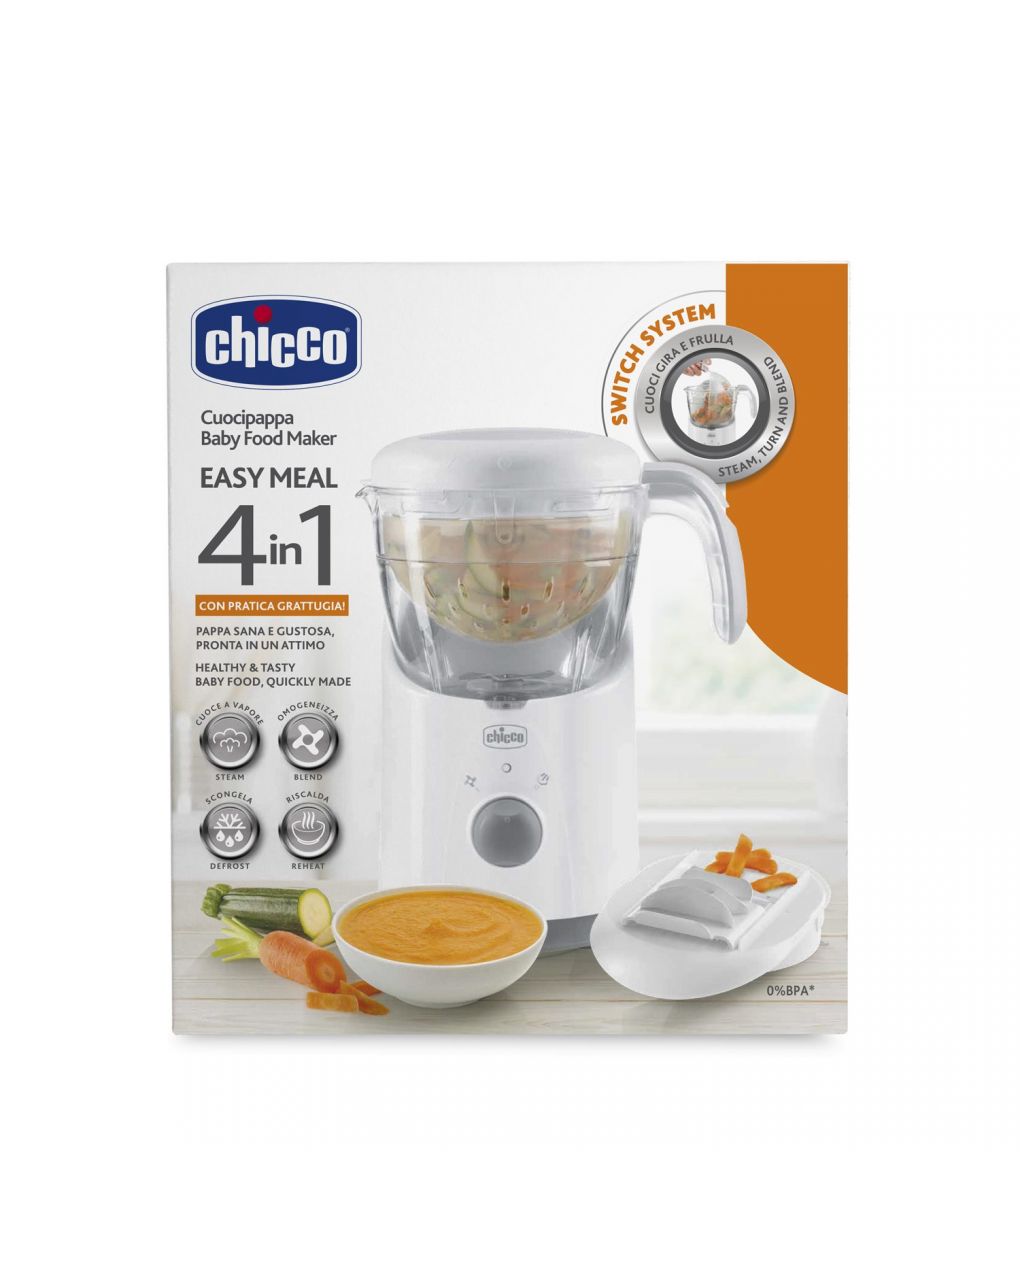 Cuocipappa easy meal - Chicco